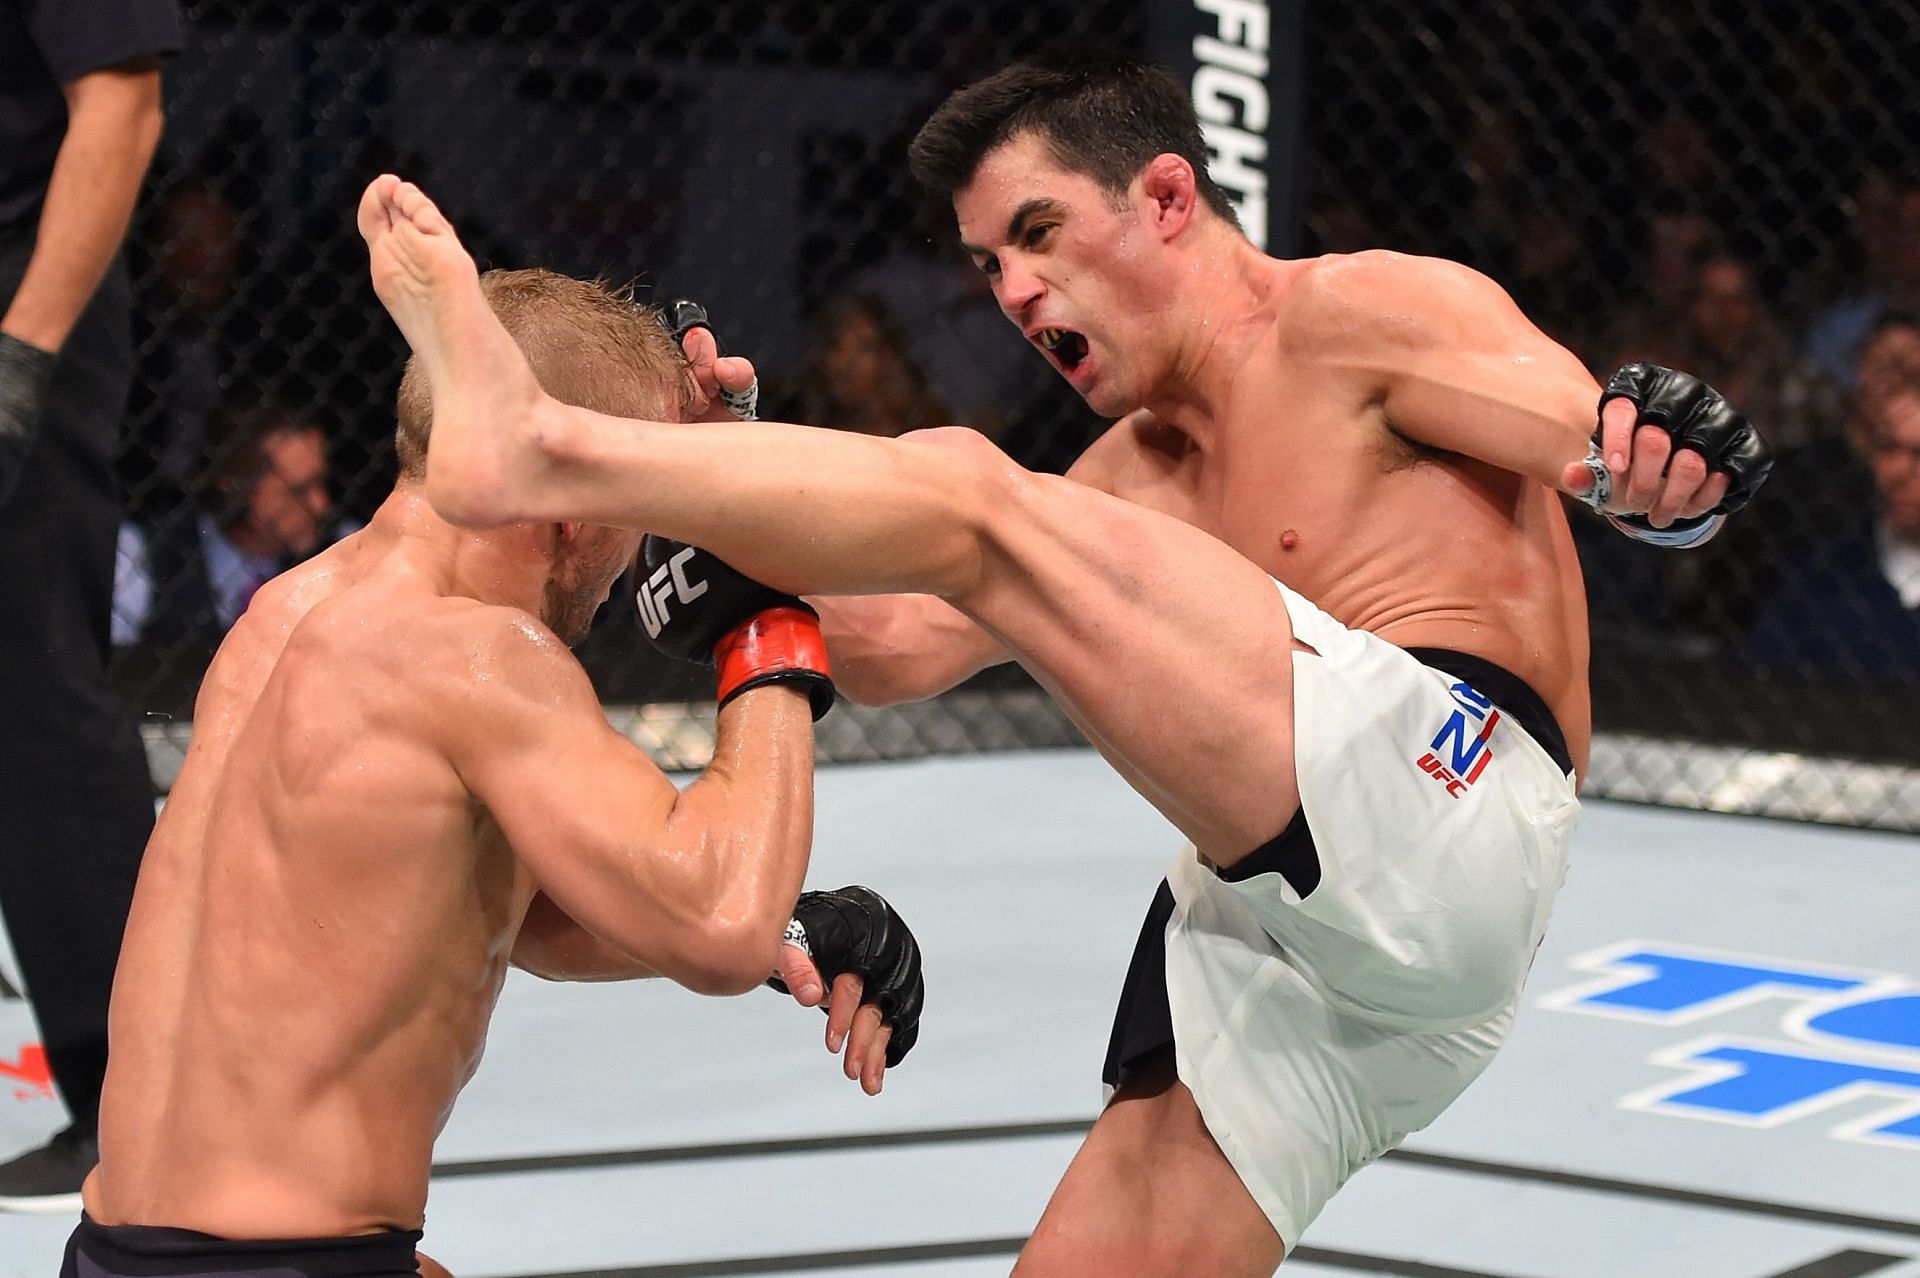 Dominick Cruz stunned everyone when he returned from a lengthy layoff to dethrone TJ Dillashaw for the bantamweight title